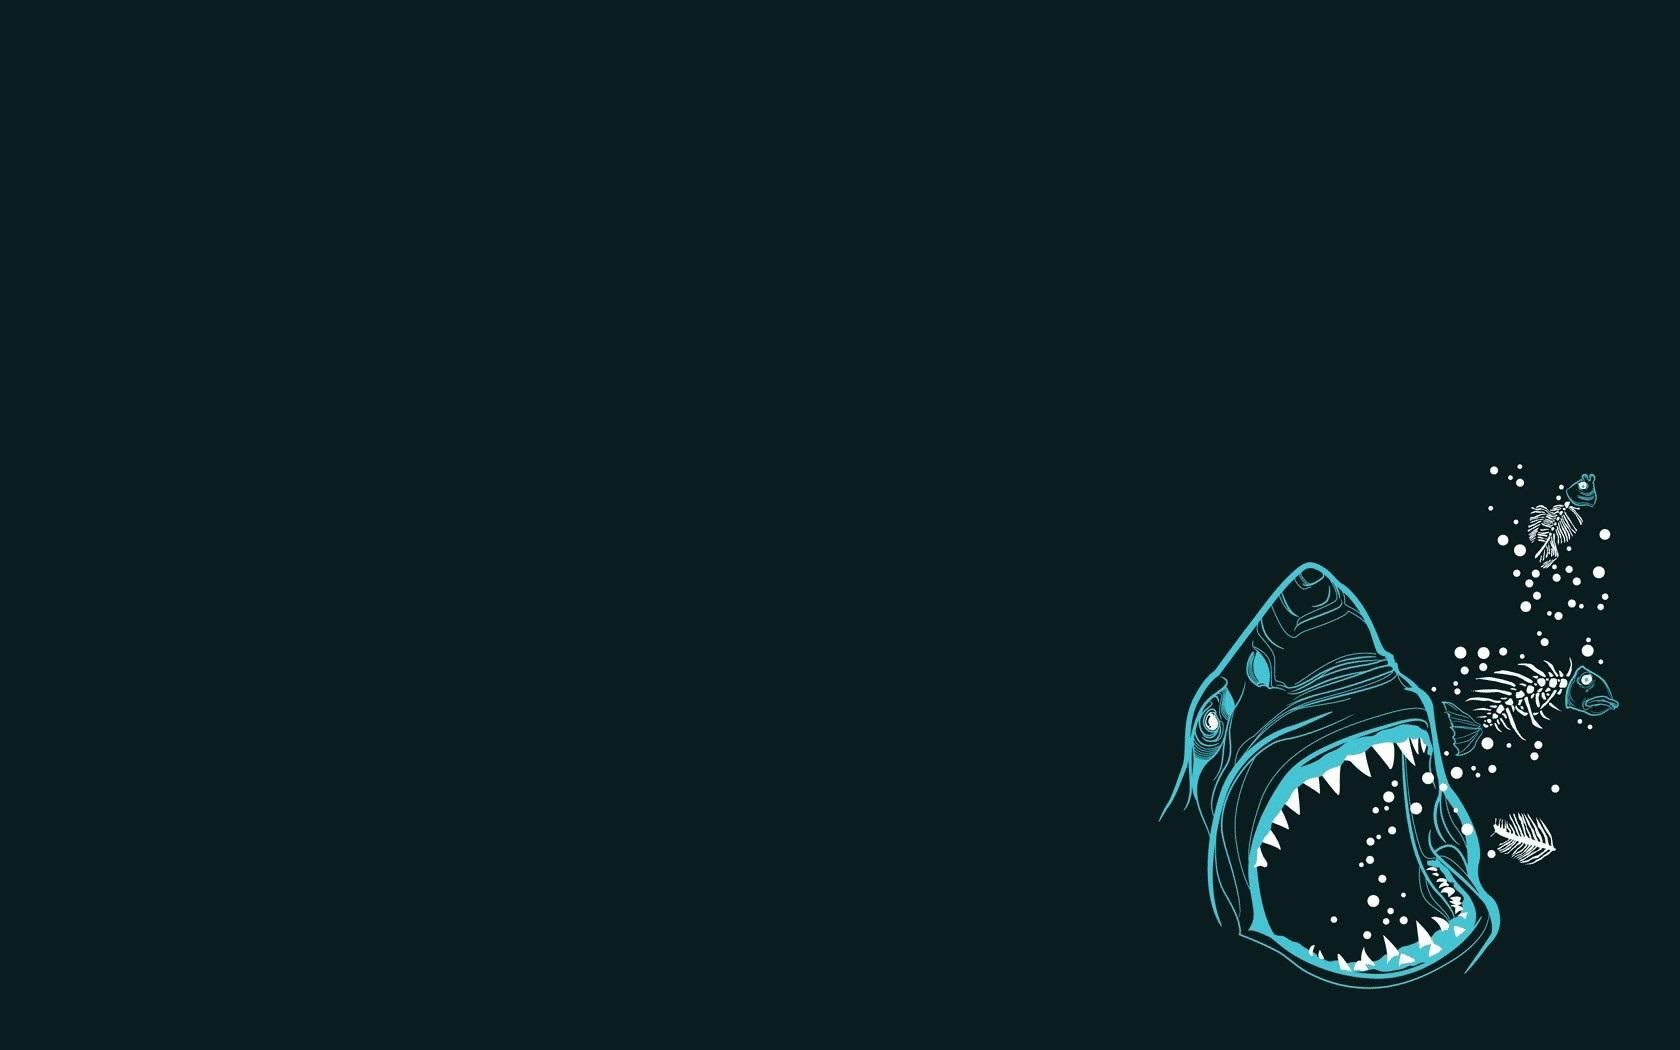 shark download latest wallpaper for pc. Artistic